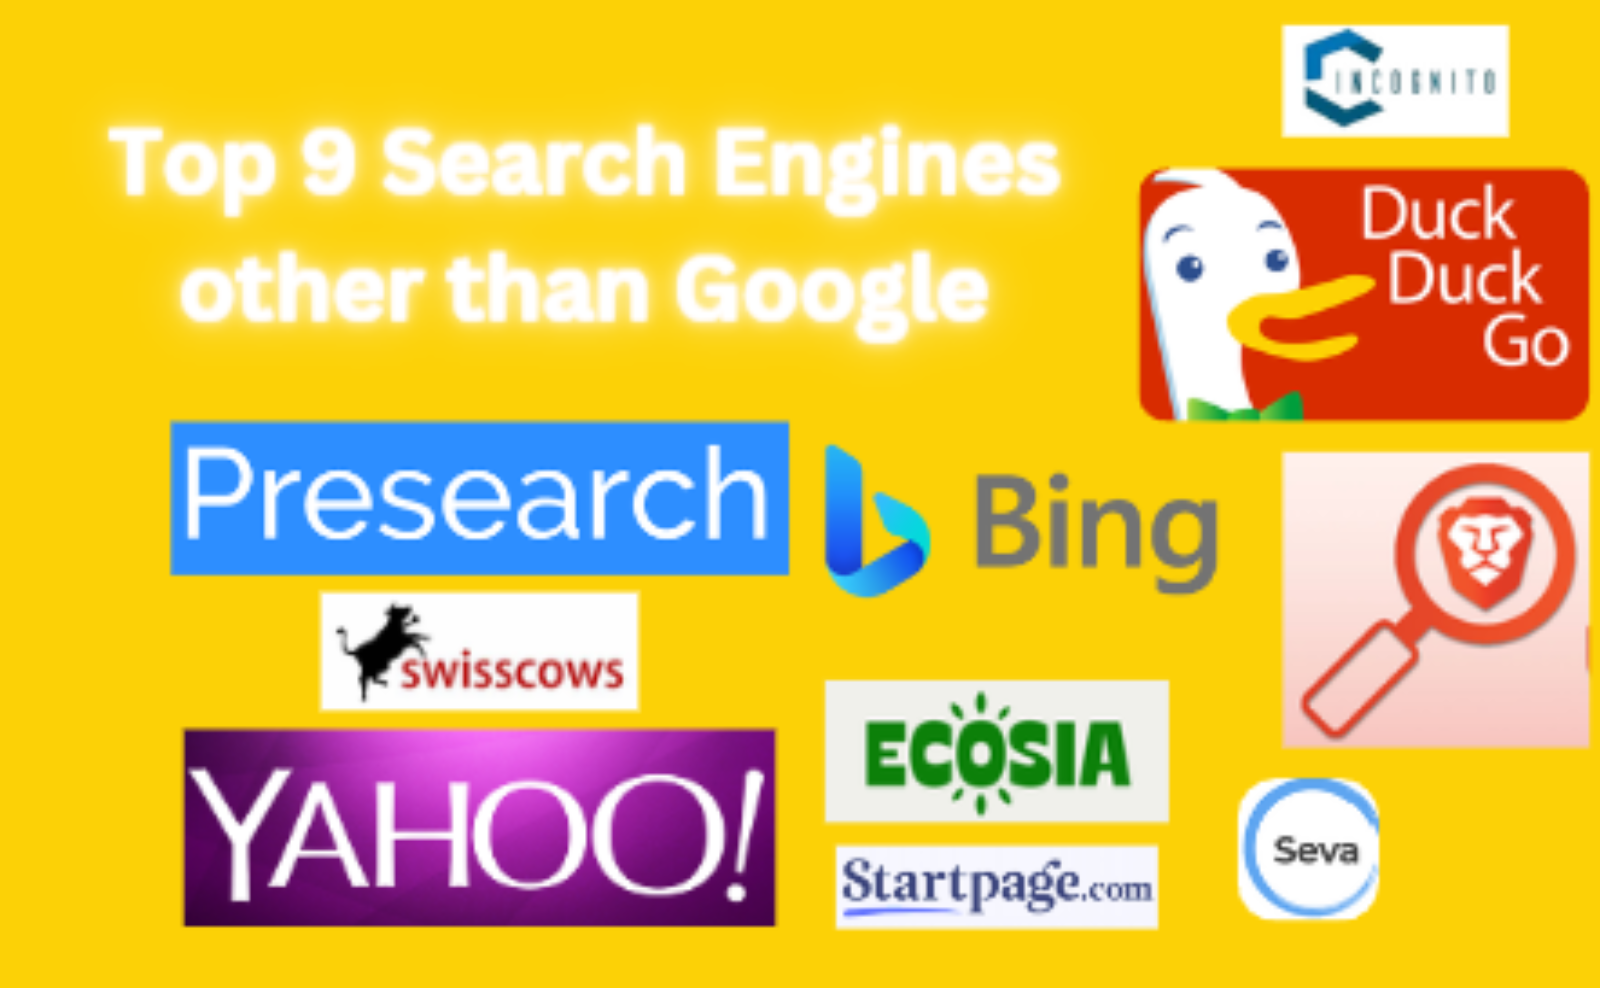 Top 9 Search Engines other than Google